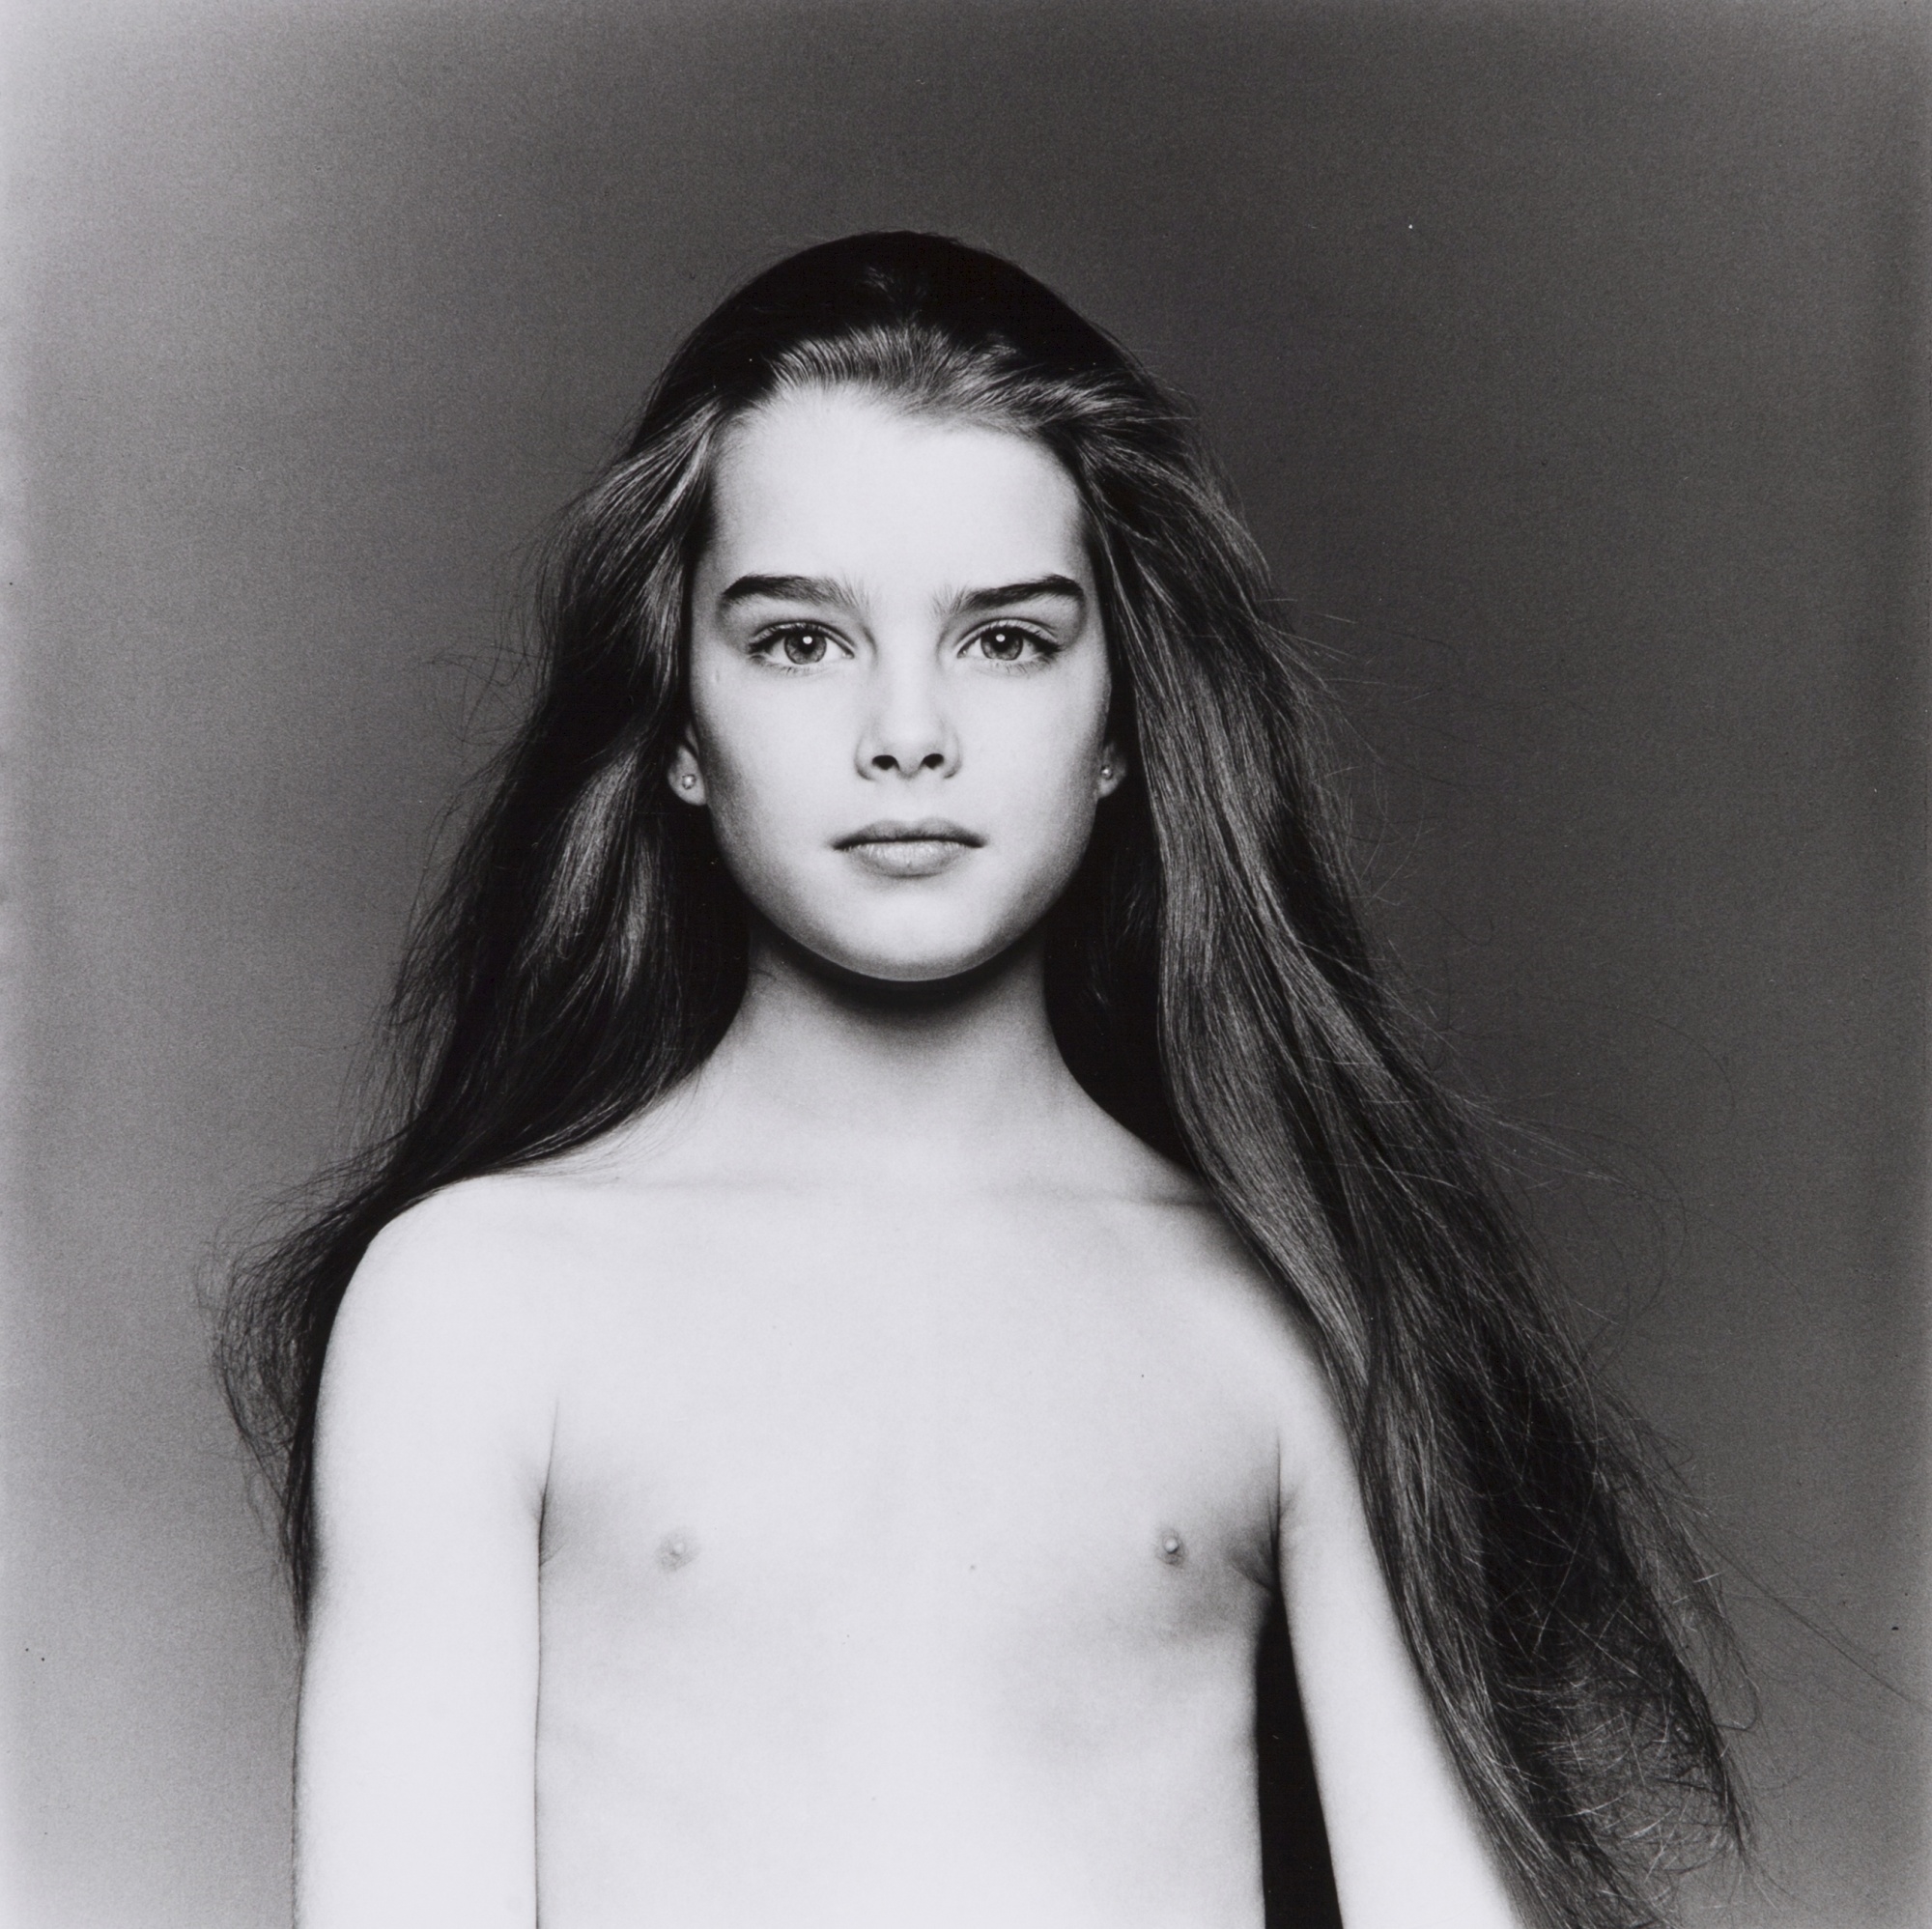 abdulrahim s altammami recommends Young Naked Brooke Shields